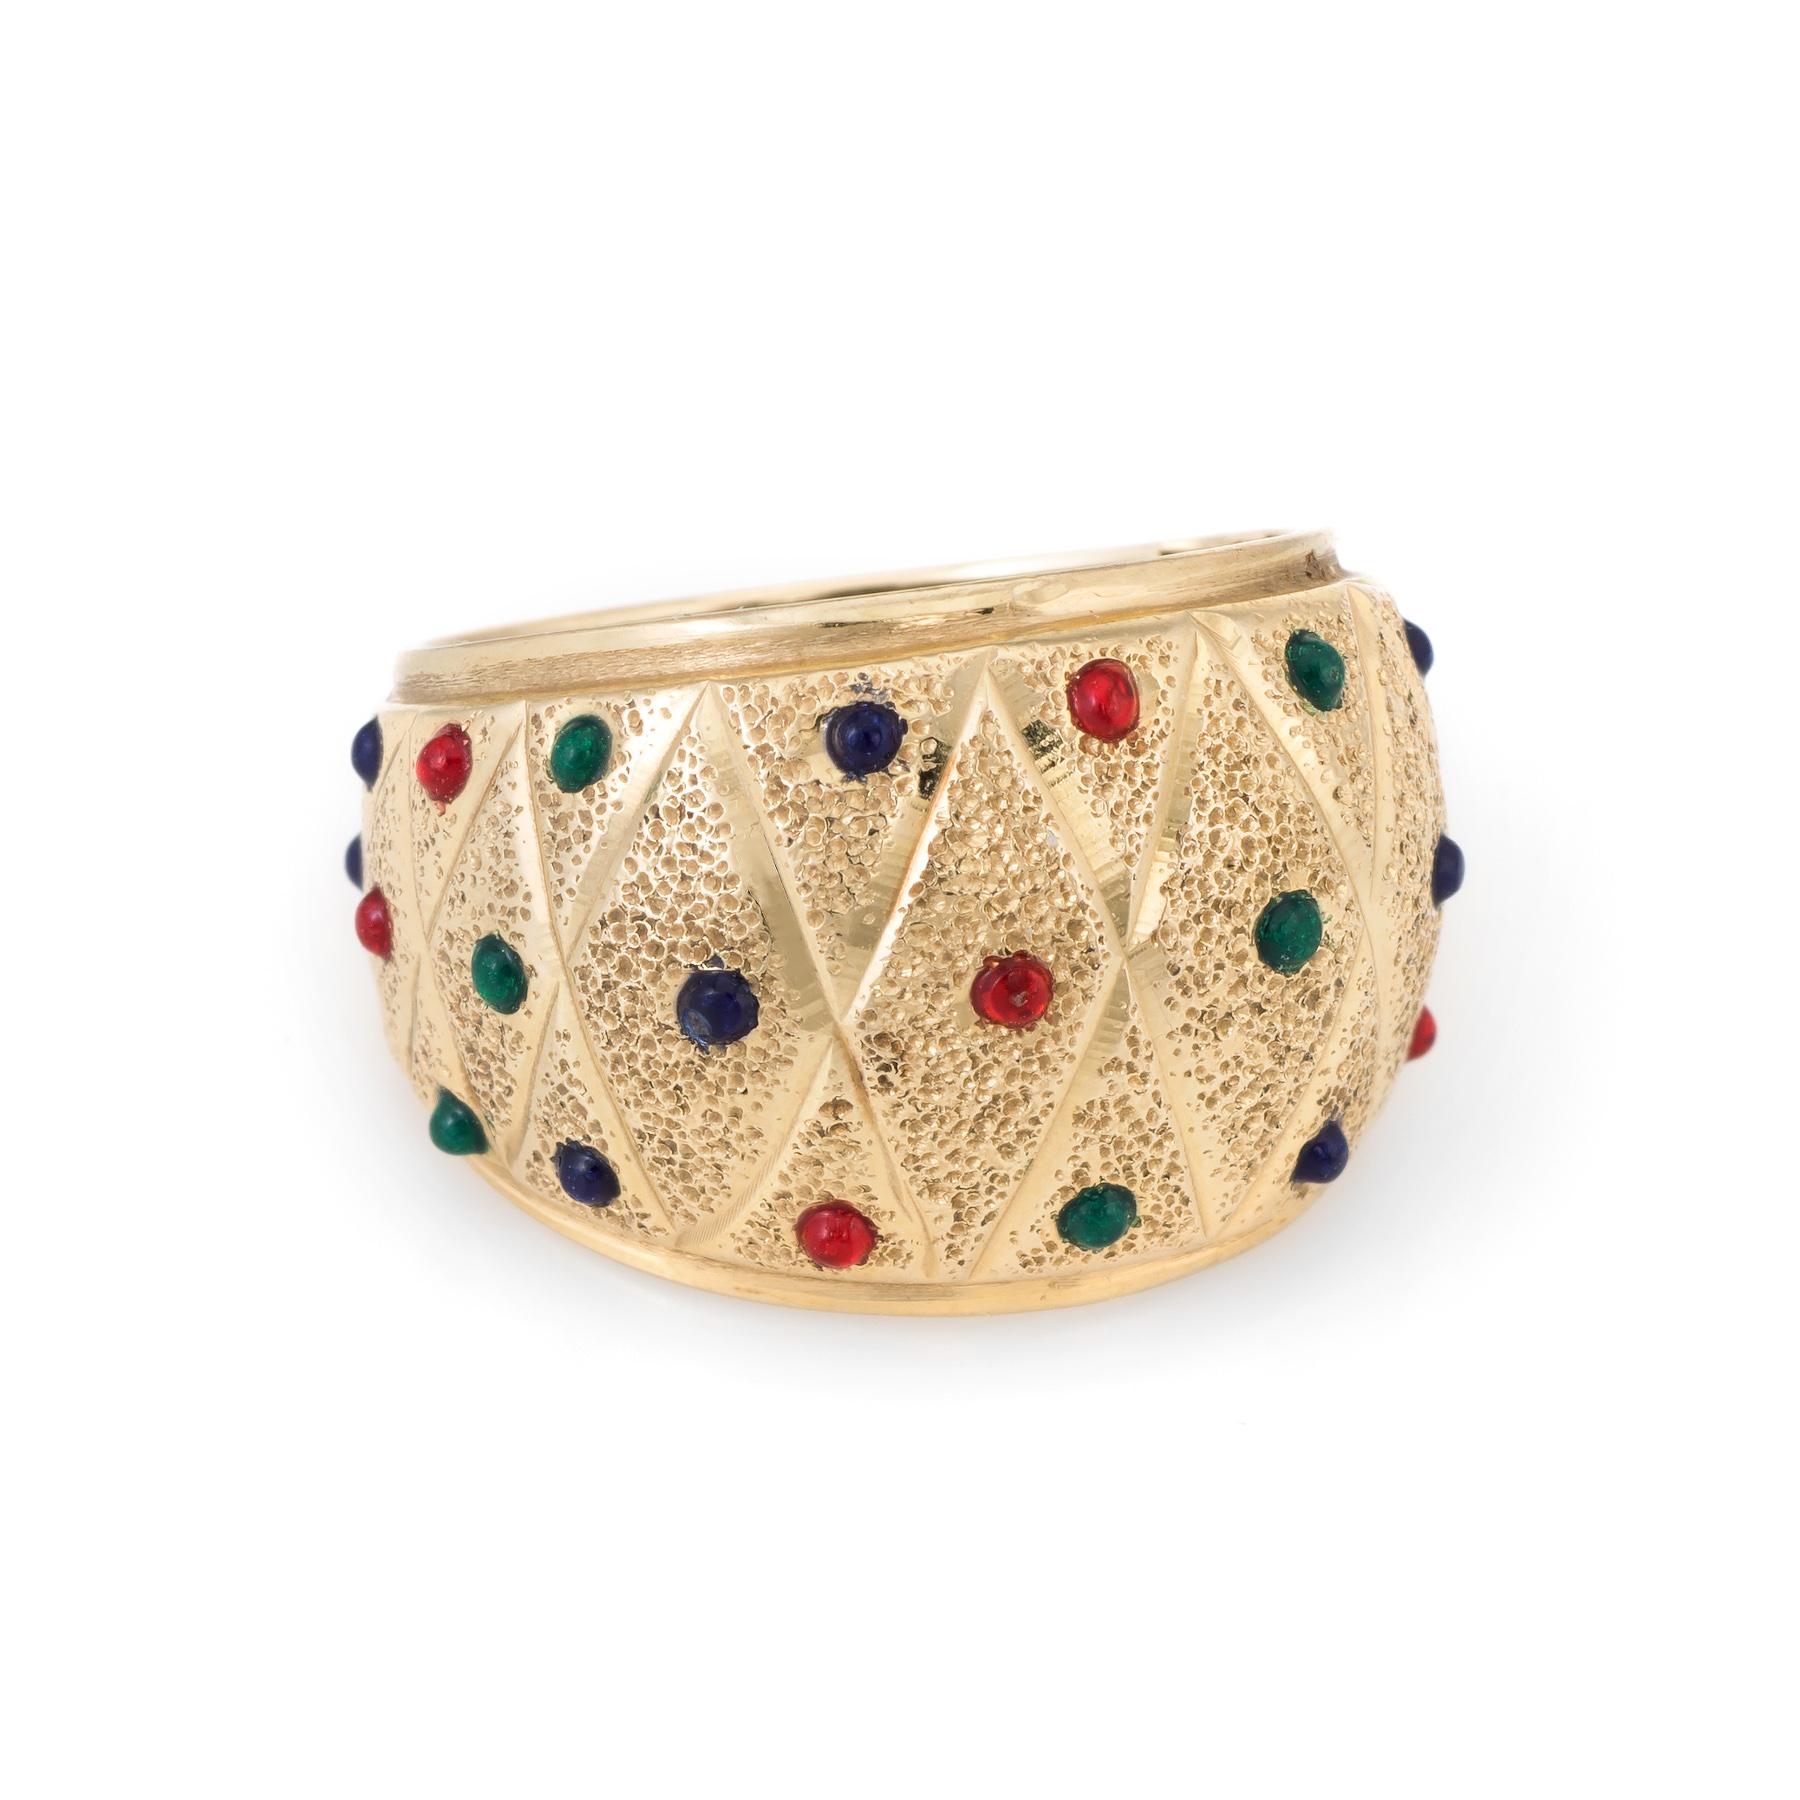 Elegant estate cigar band, crafted in 14 karat yellow gold. 

Blue, red and green enamel dot the textured dome mount. 

The ring is in excellent condition. 

Particulars:

Weight: 4.6 grams

Stones:  N/A.    

Size & Measurements: The ring is a size